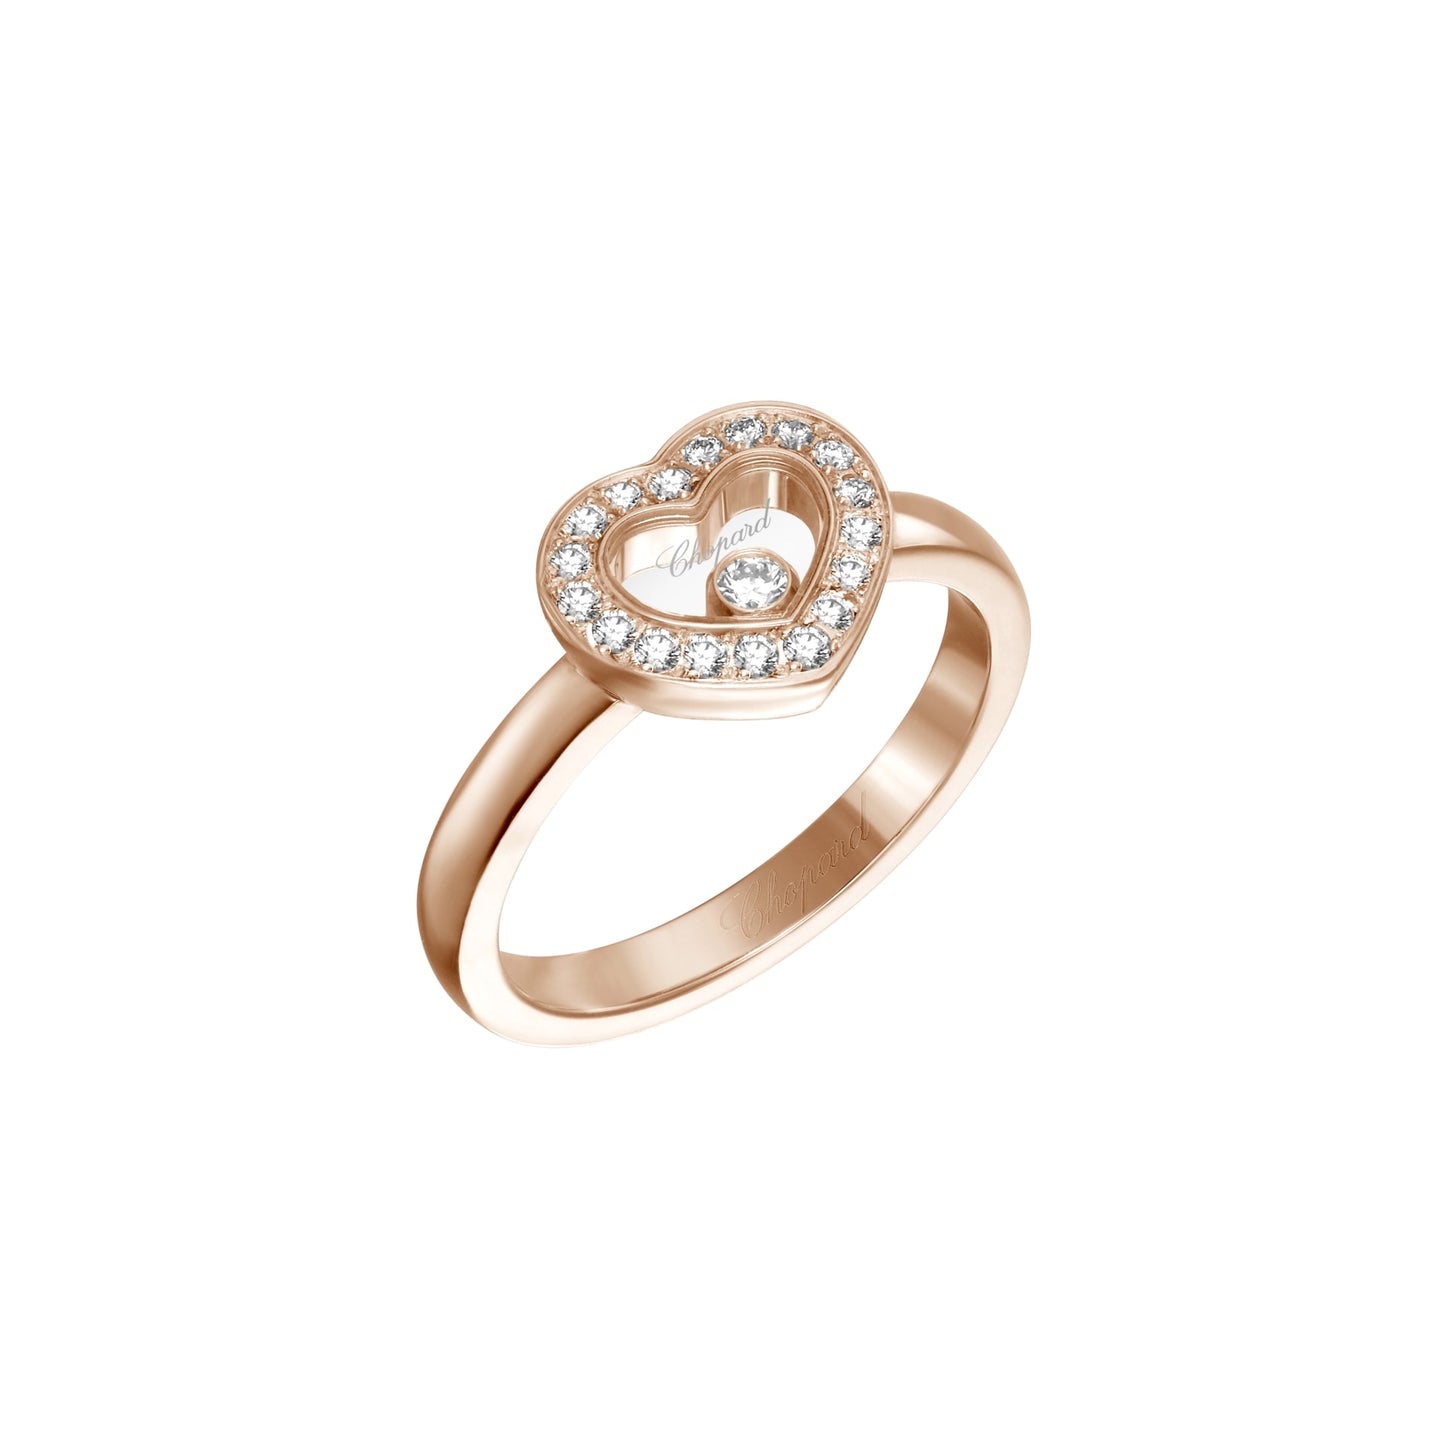 HAPPY DIAMONDS ICONS RING, ETHICAL ROSE GOLD, DIAMONDS 82A054-5200